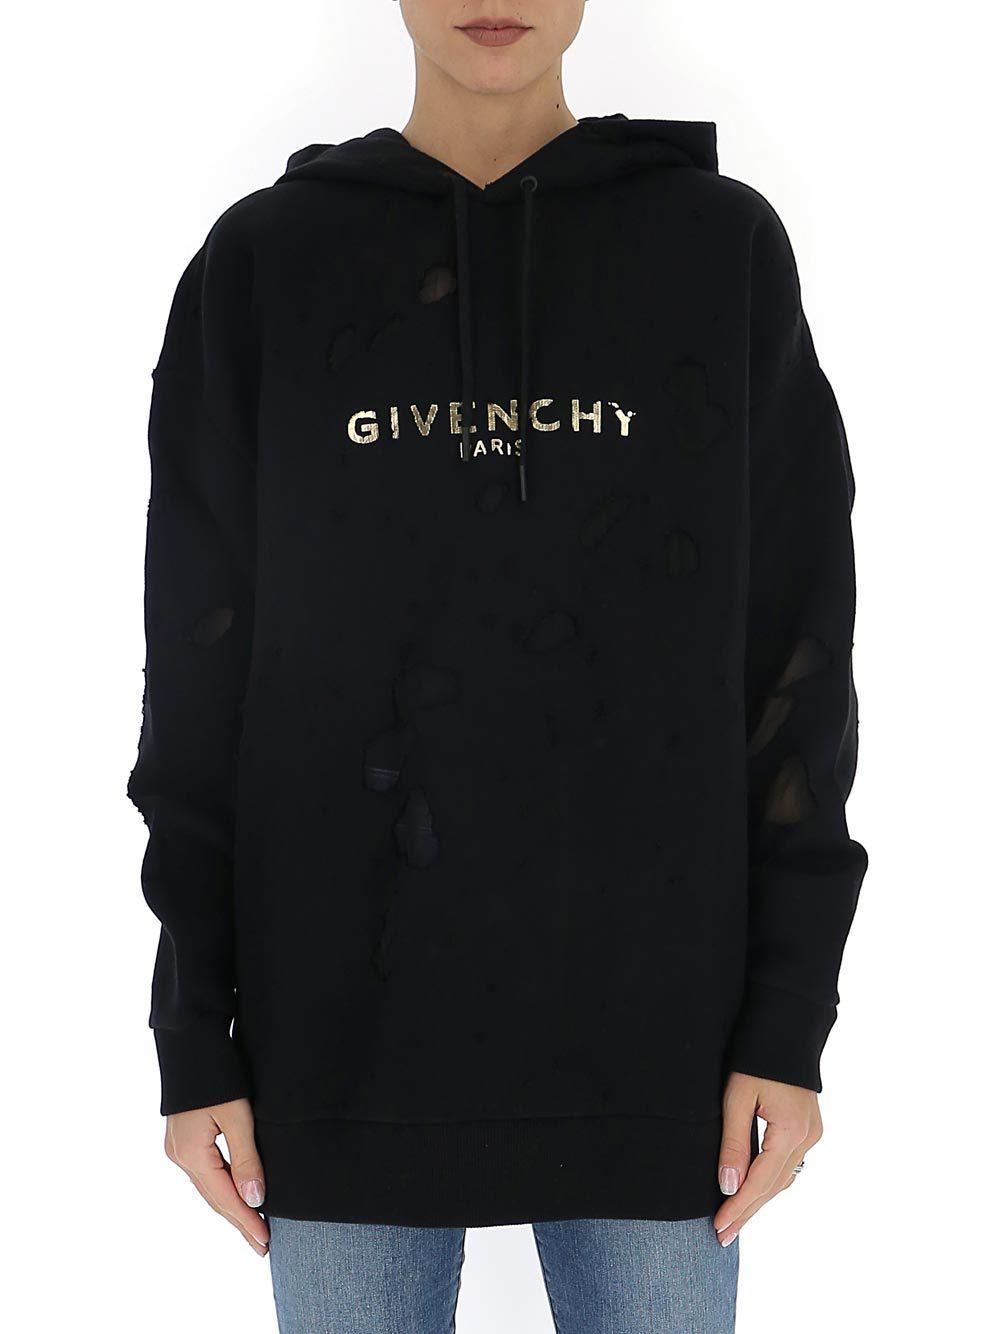 Givenchy Cotton Distressed Logo Hoodie in Black - Lyst